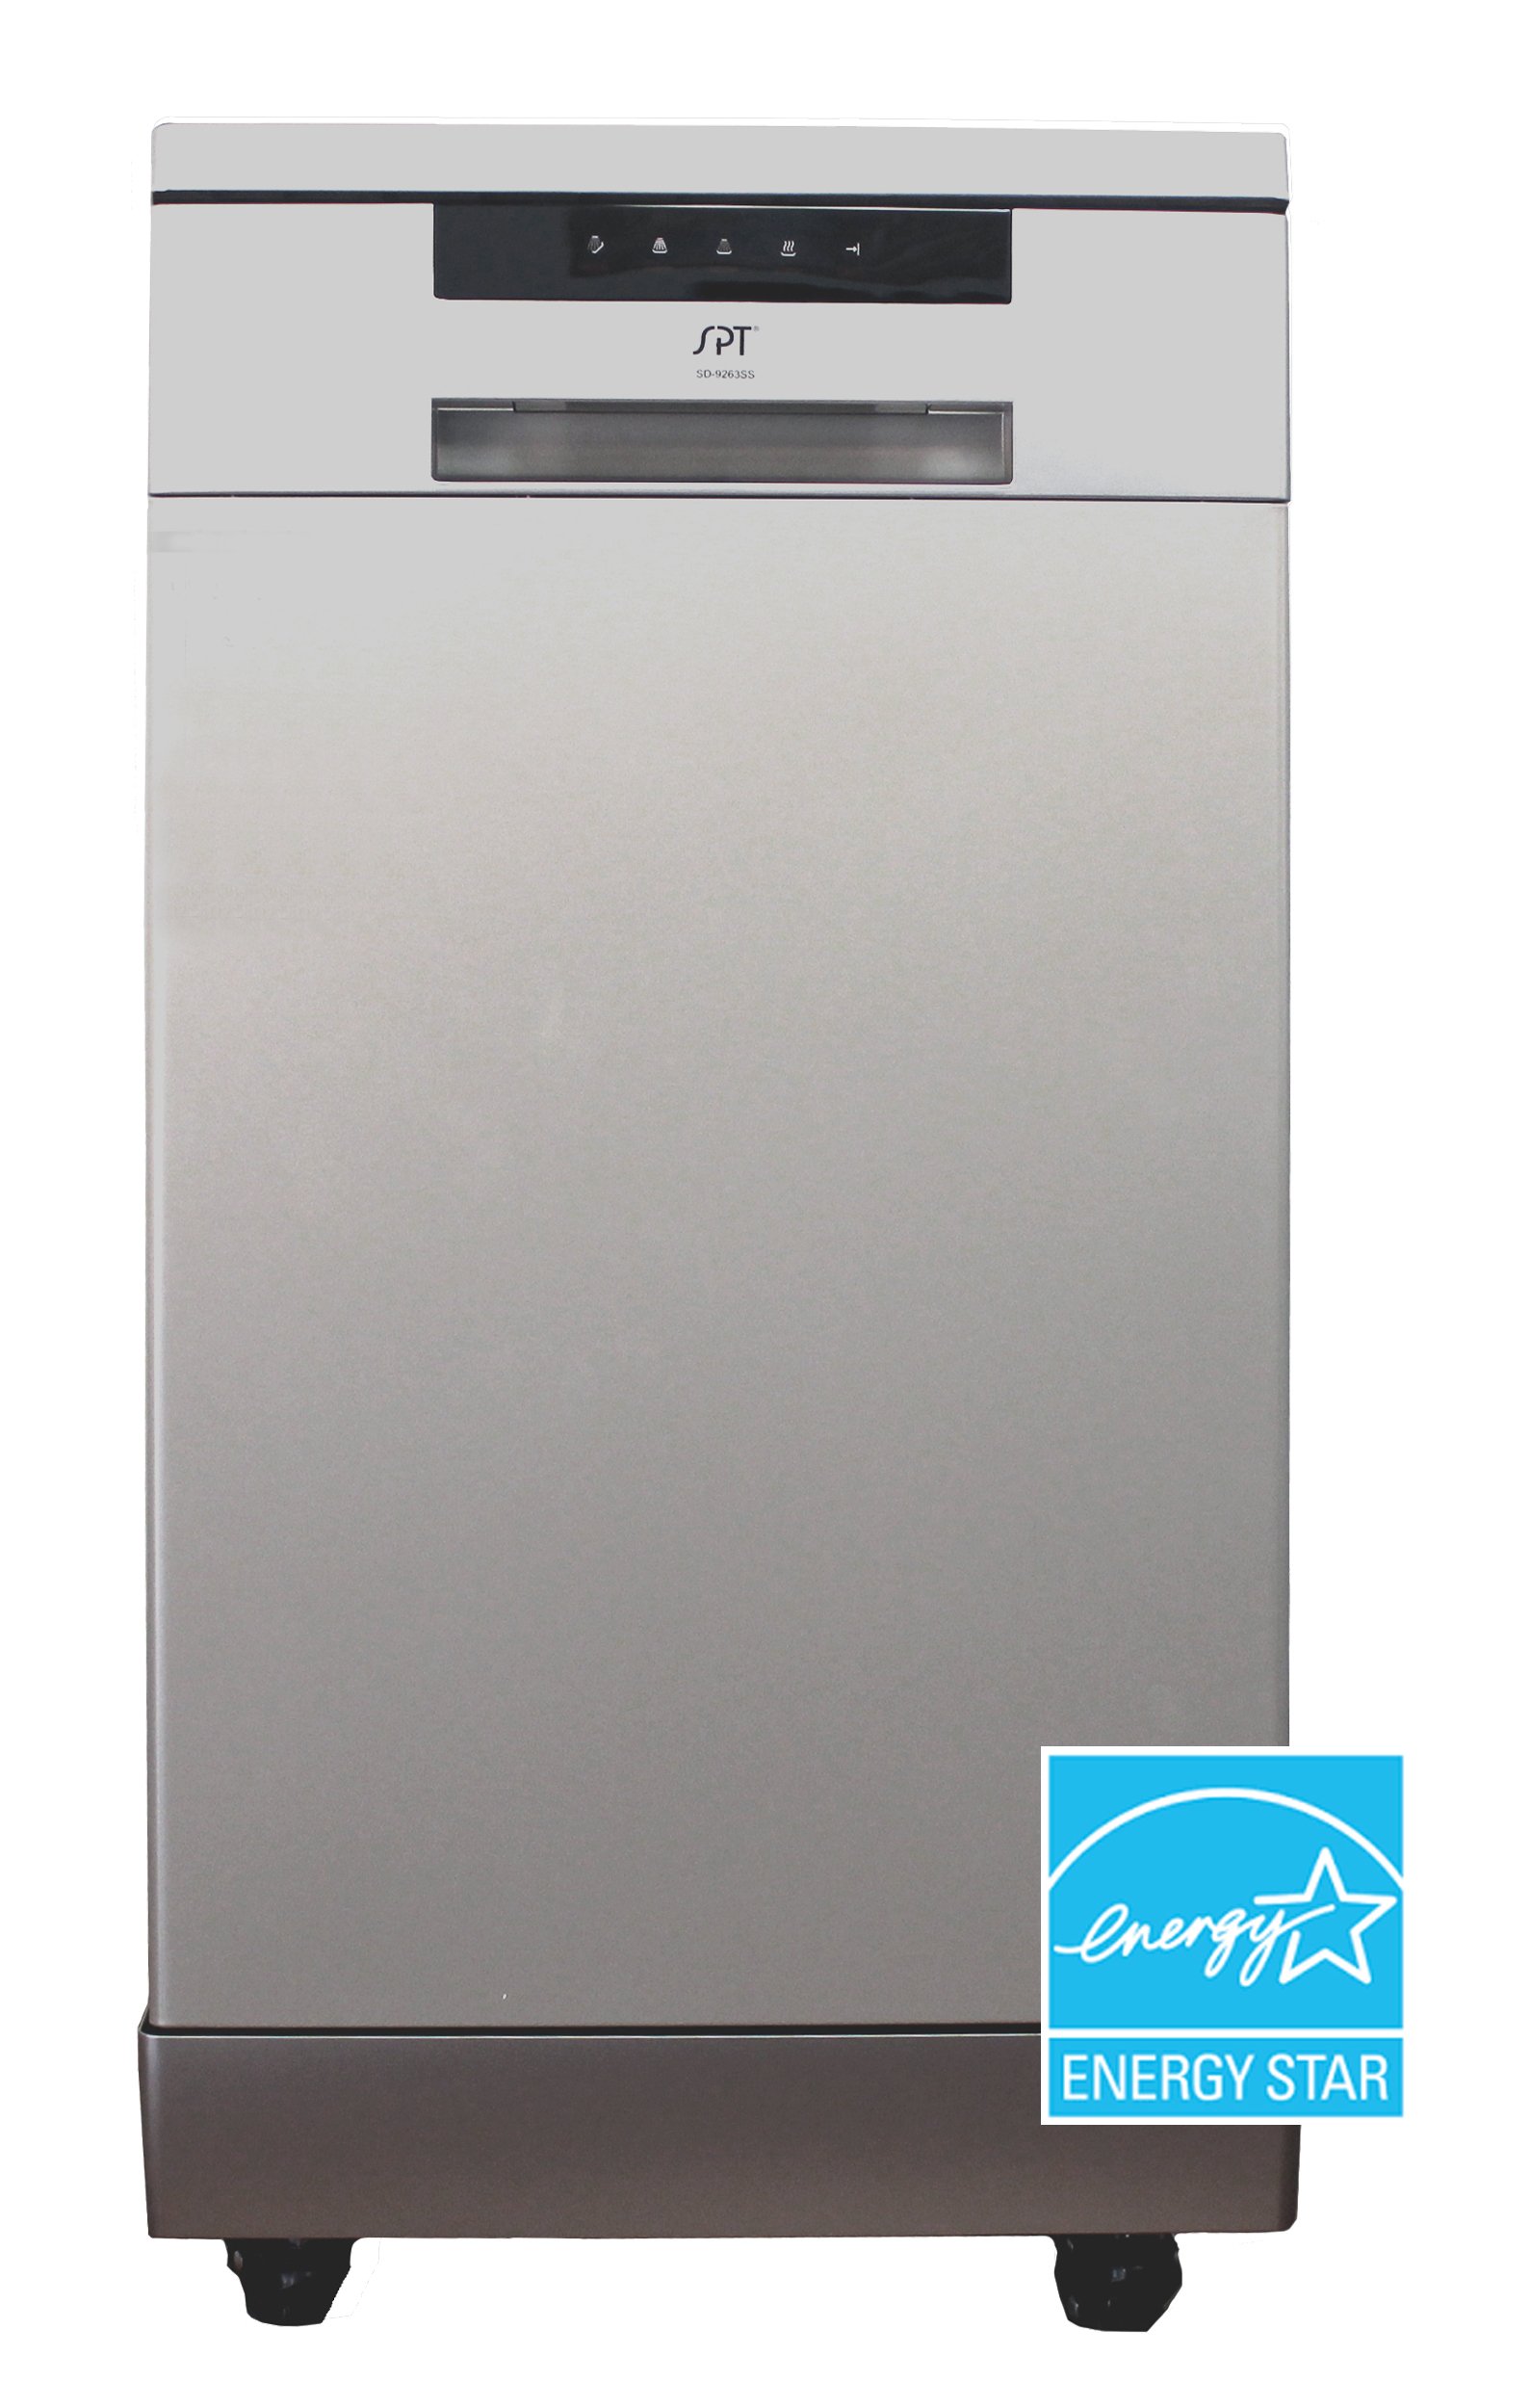 Sunpentown 18" Portable Dishwasher with Energy Star - Stainless